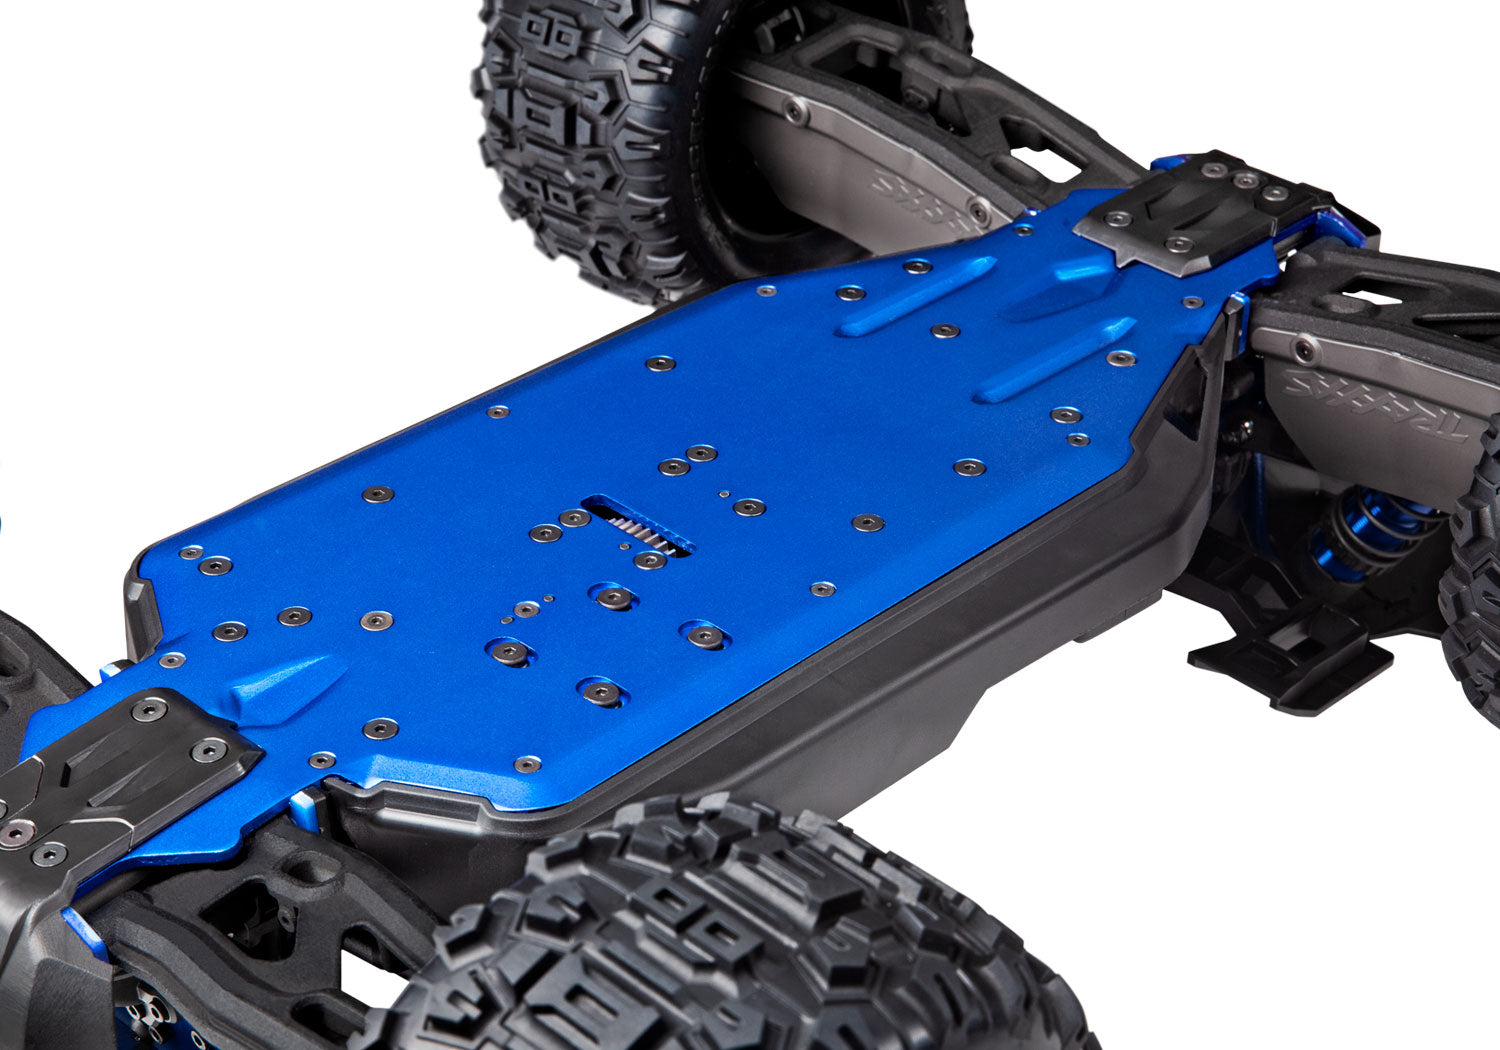 Traxxas Sledge 1/8 RTR 6S 4WD Electric Monster Truck